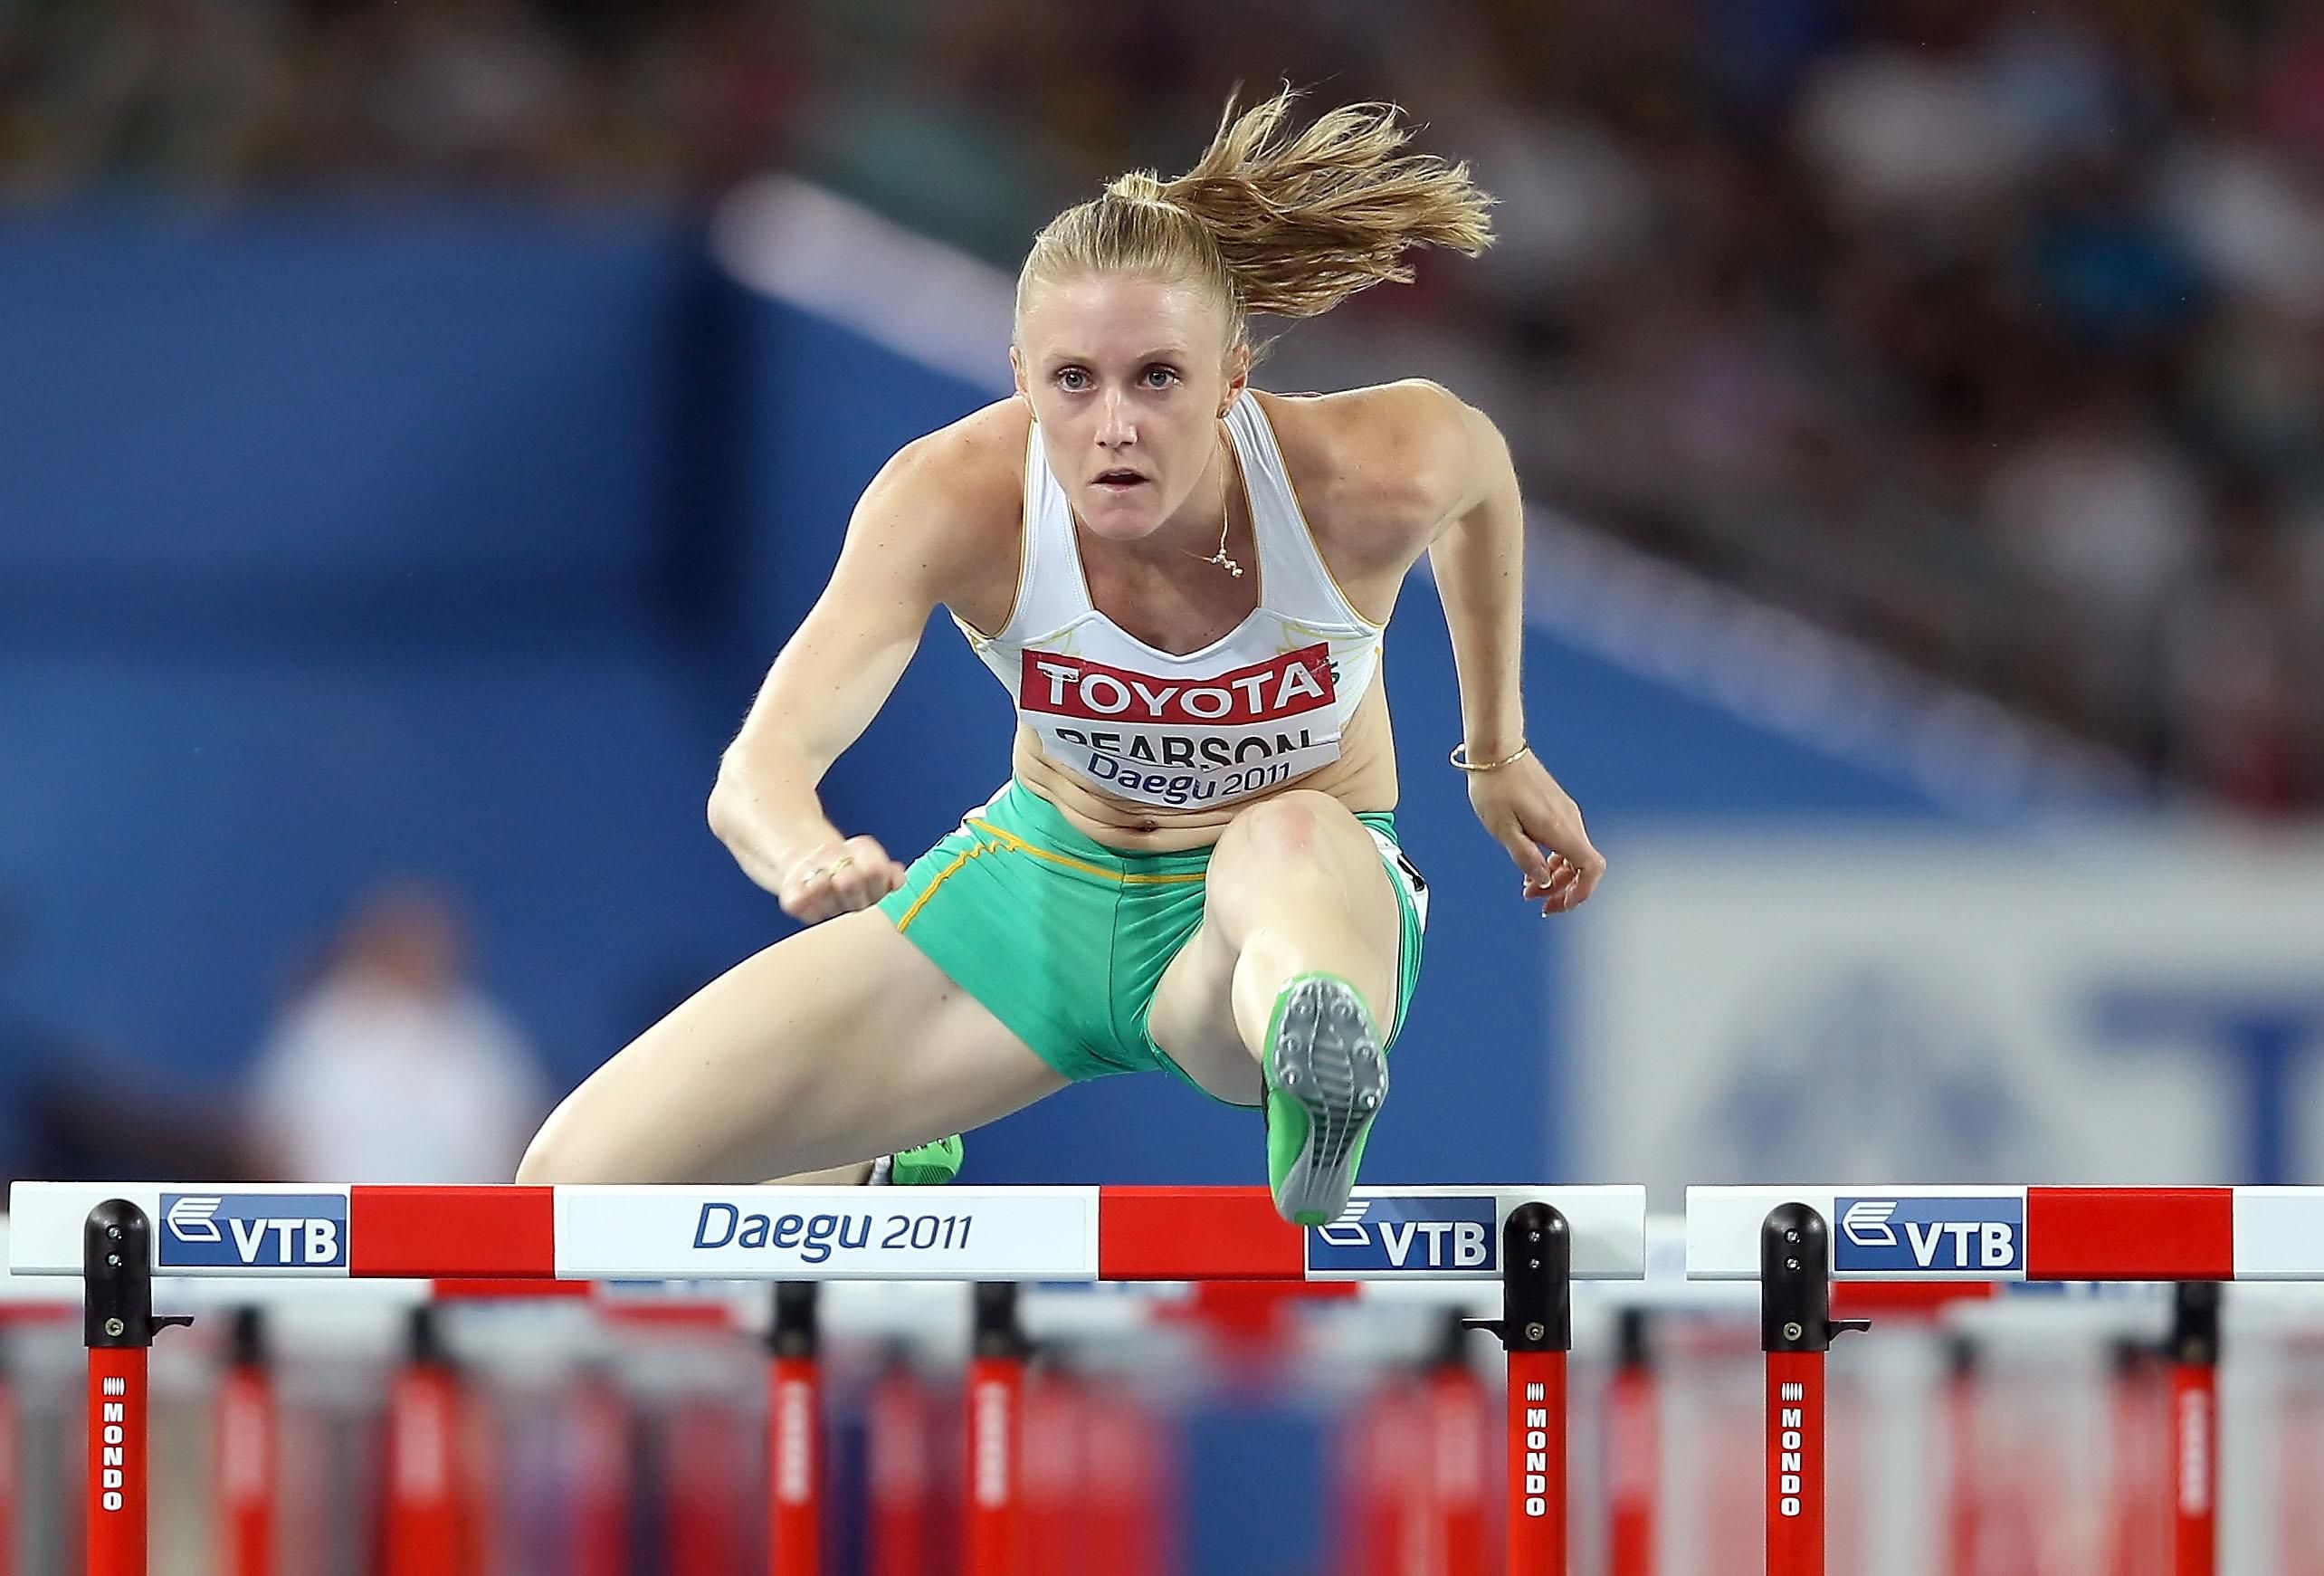 Sally Pearson en route to the 2011 world title in Daegu